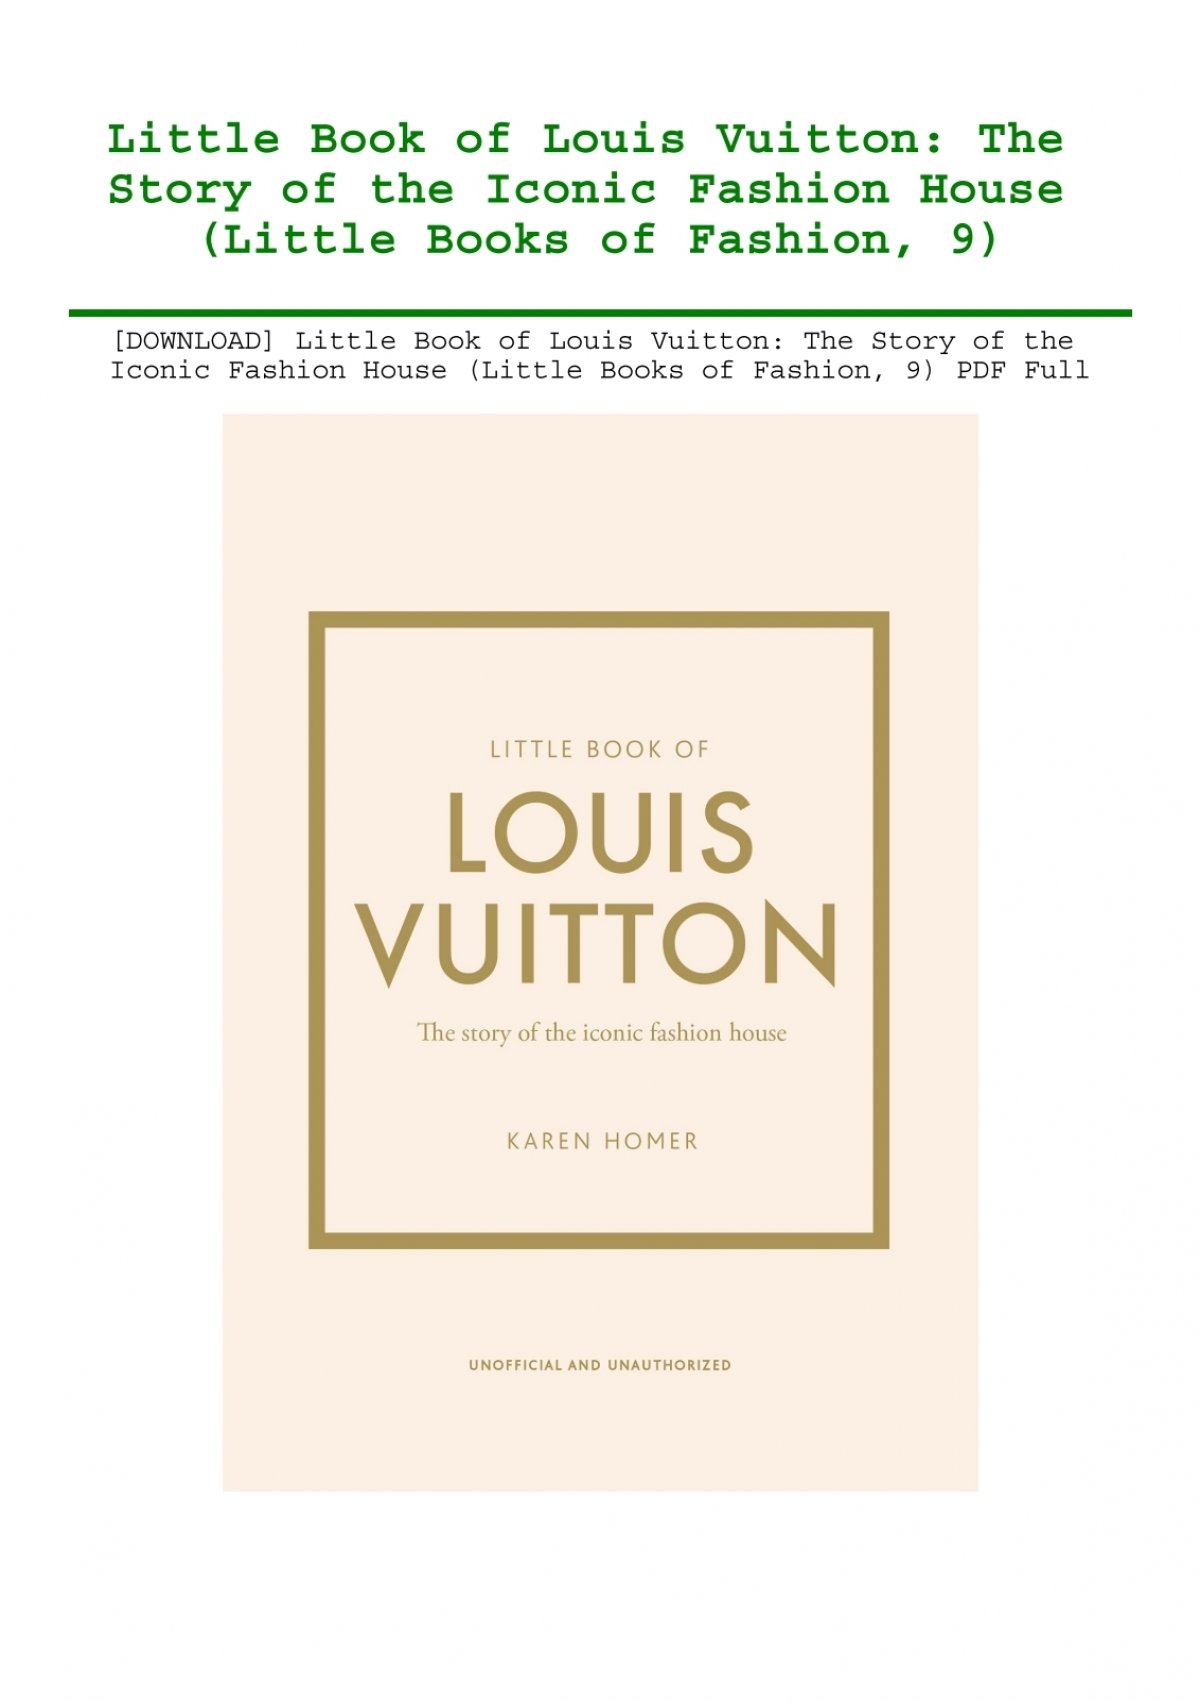 DOWNLOAD] Little Book of Louis Vuitton The Story of the Iconic